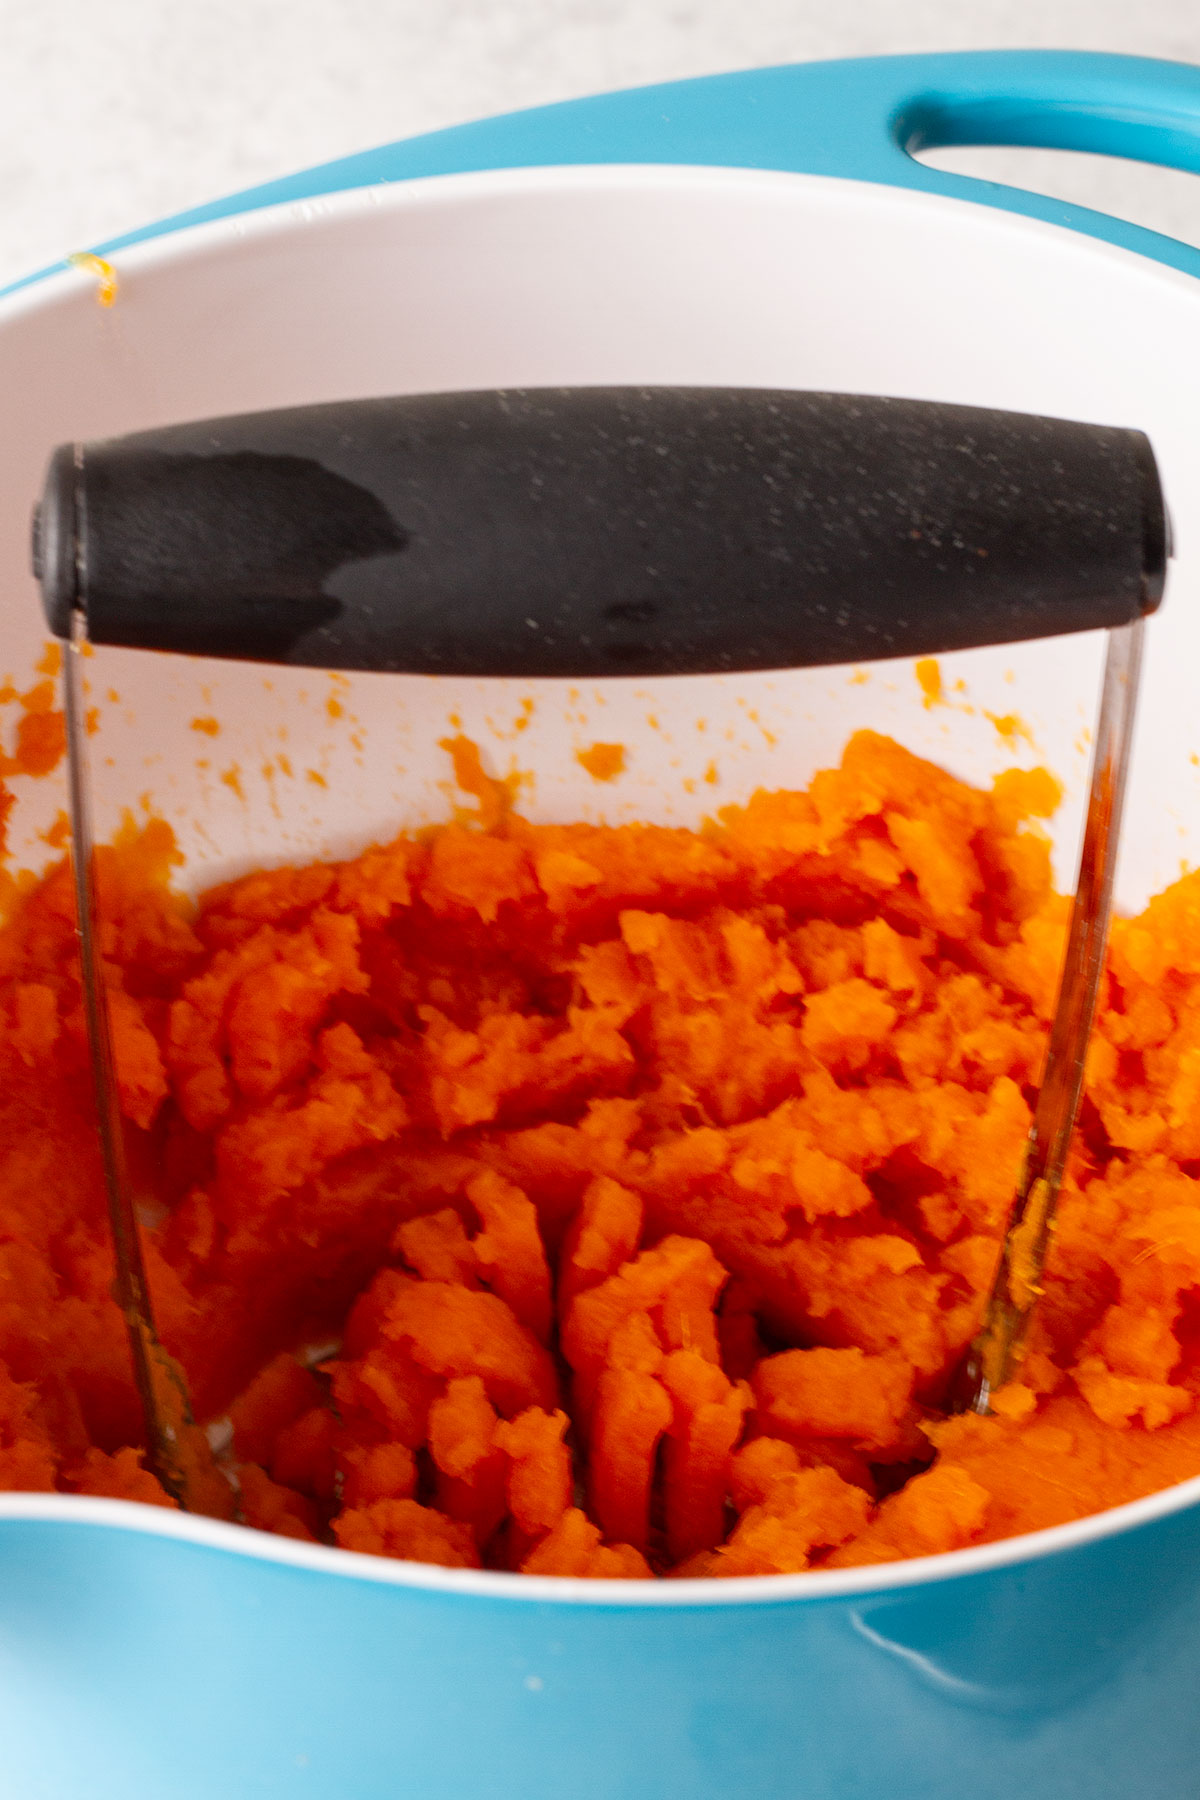 Mashing the cooked sweet potatoes in a blue and white bowl.